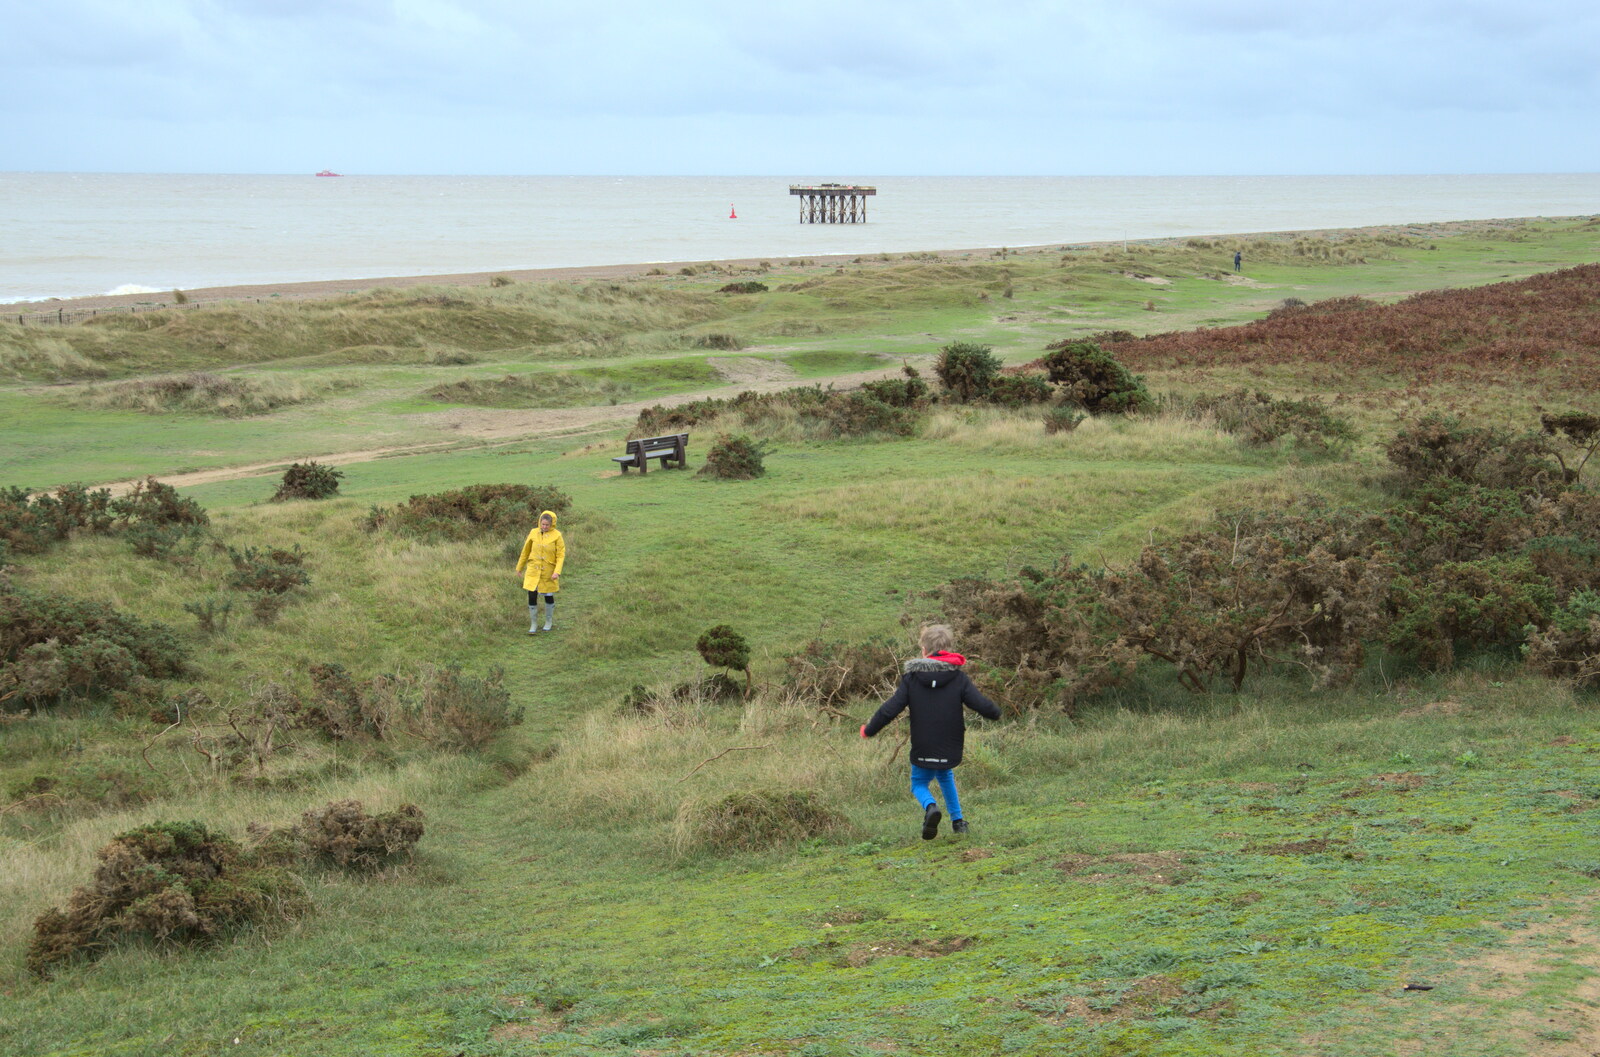 Harry runs down to meet Isobel from Sizewell Beach and the Lion Pub, Sizewell and Theberton, Suffolk - 4th October 2020